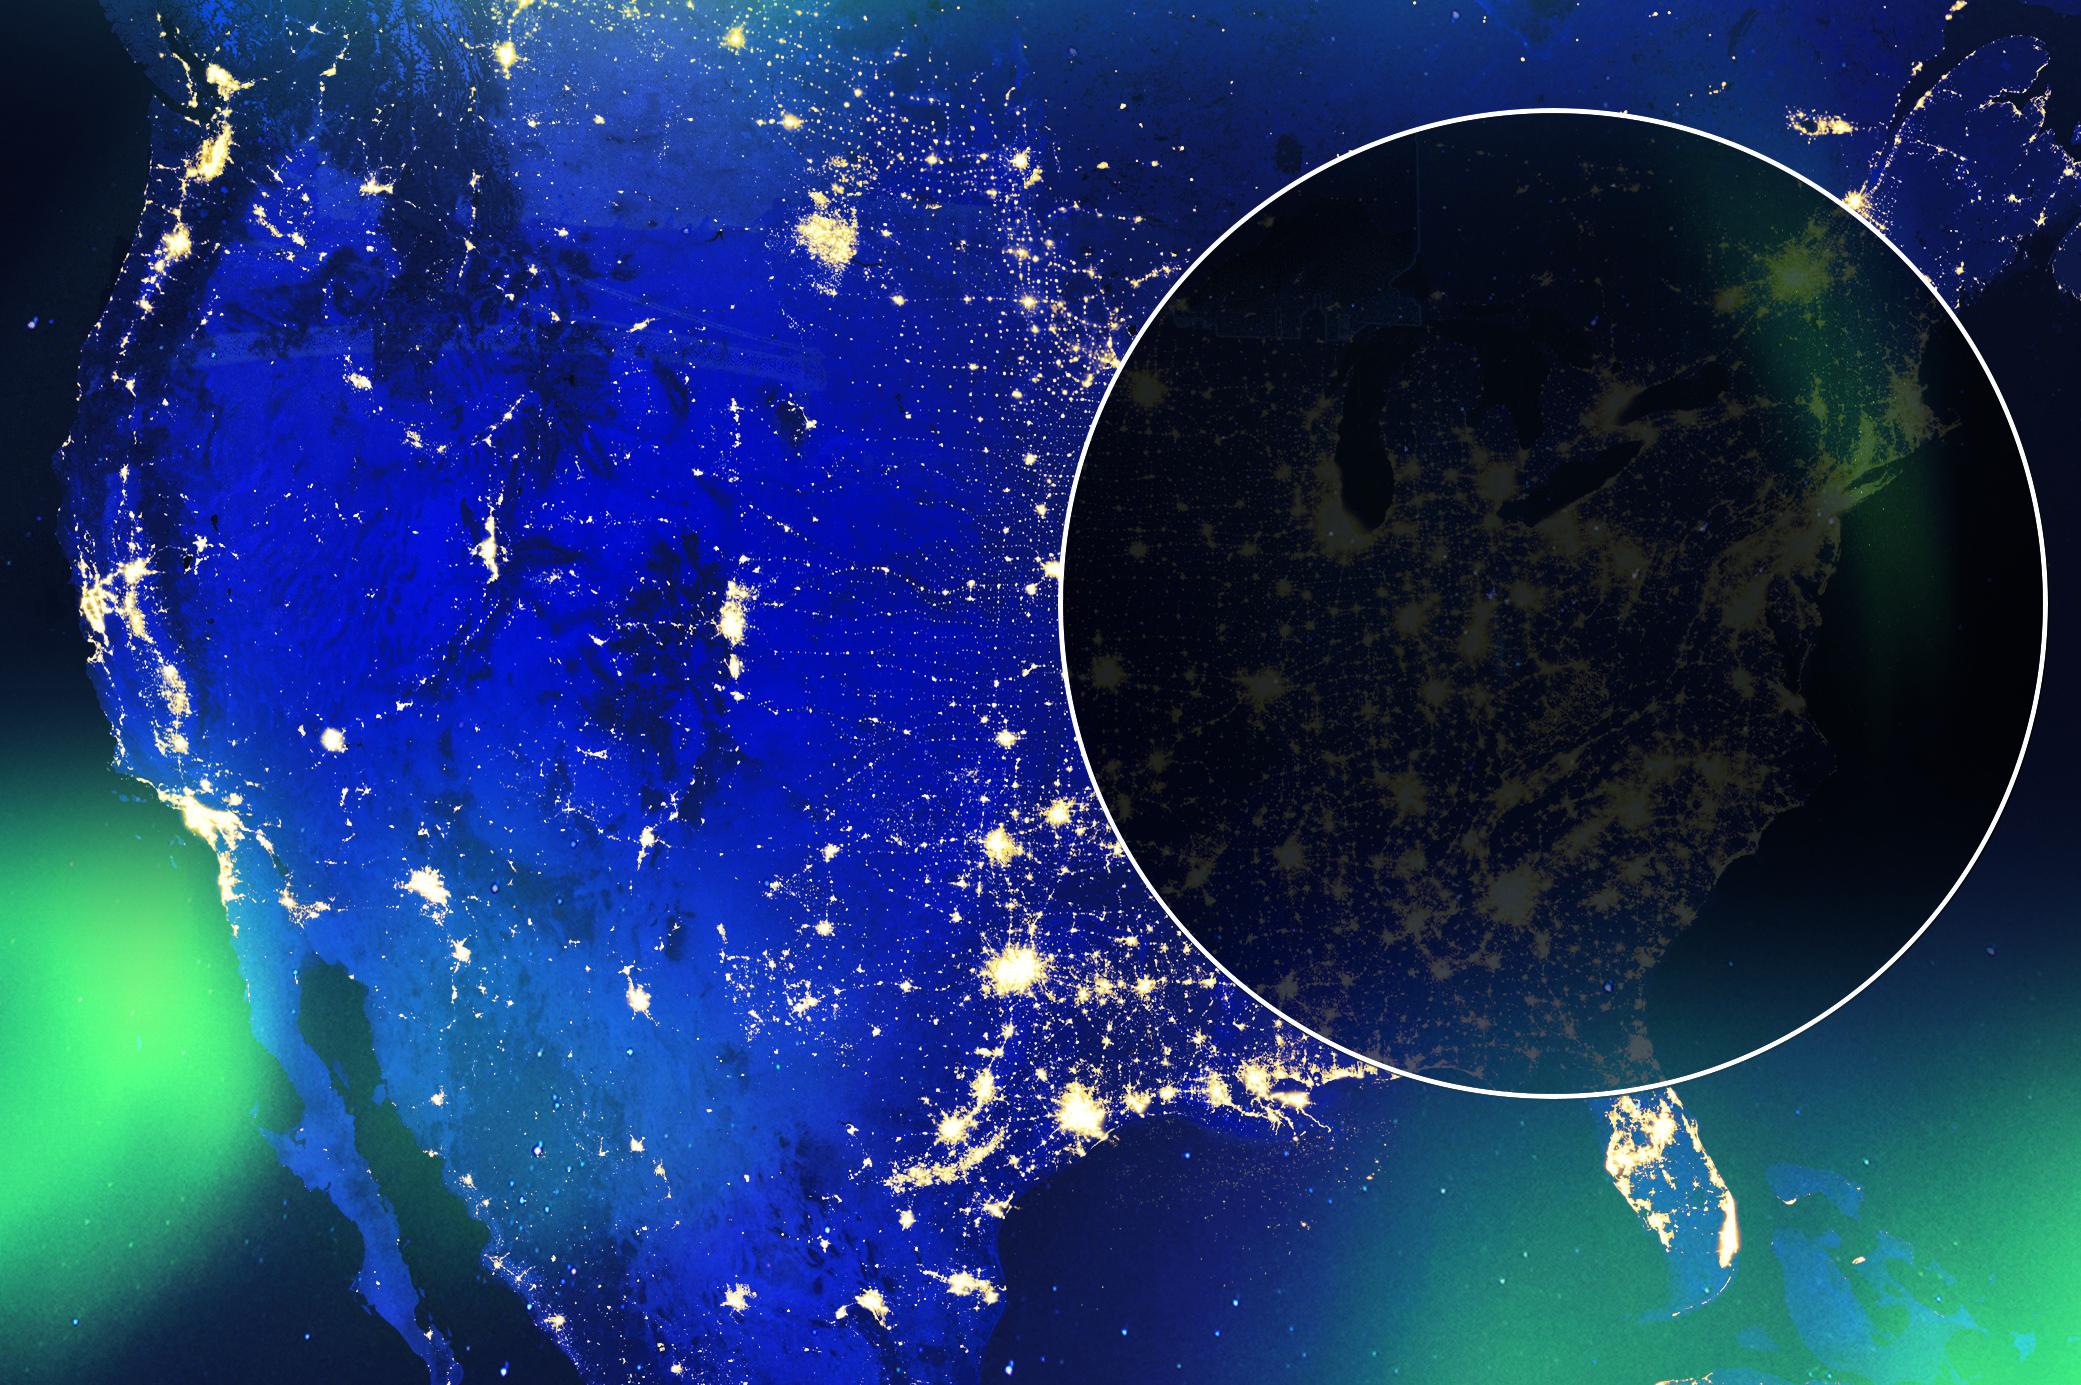 a graphic showing the united states lit up at night